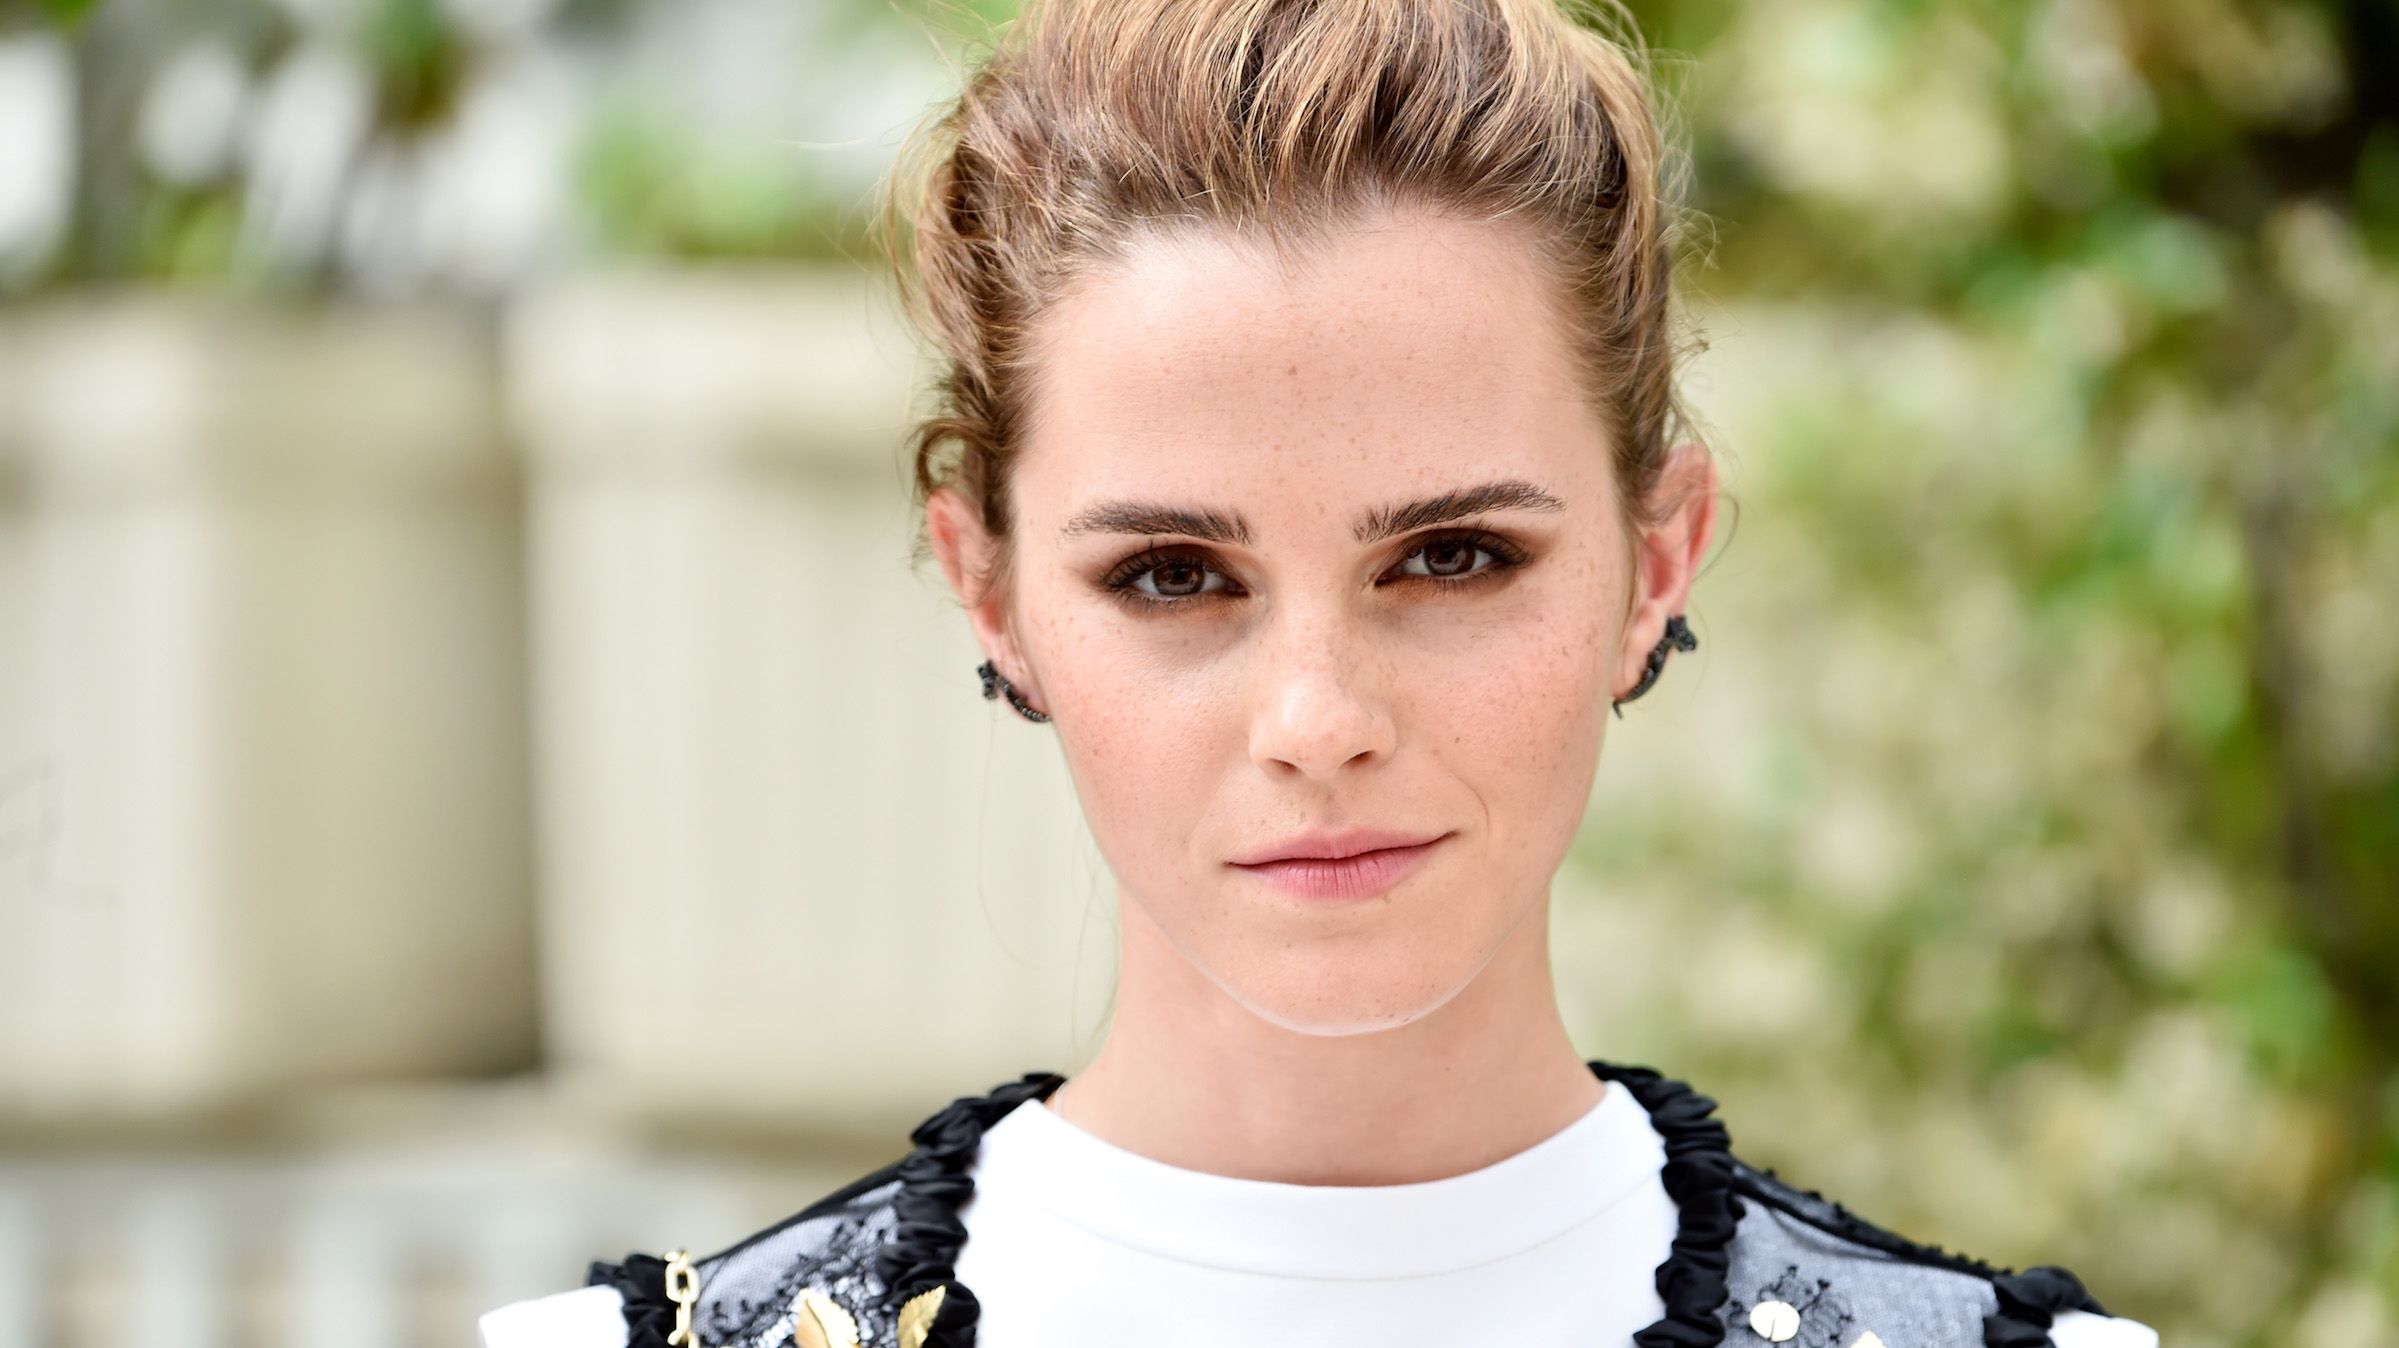 Harry Potter's Emma Watson Named Fifth Most-Admired Woman in the World | Mental Floss